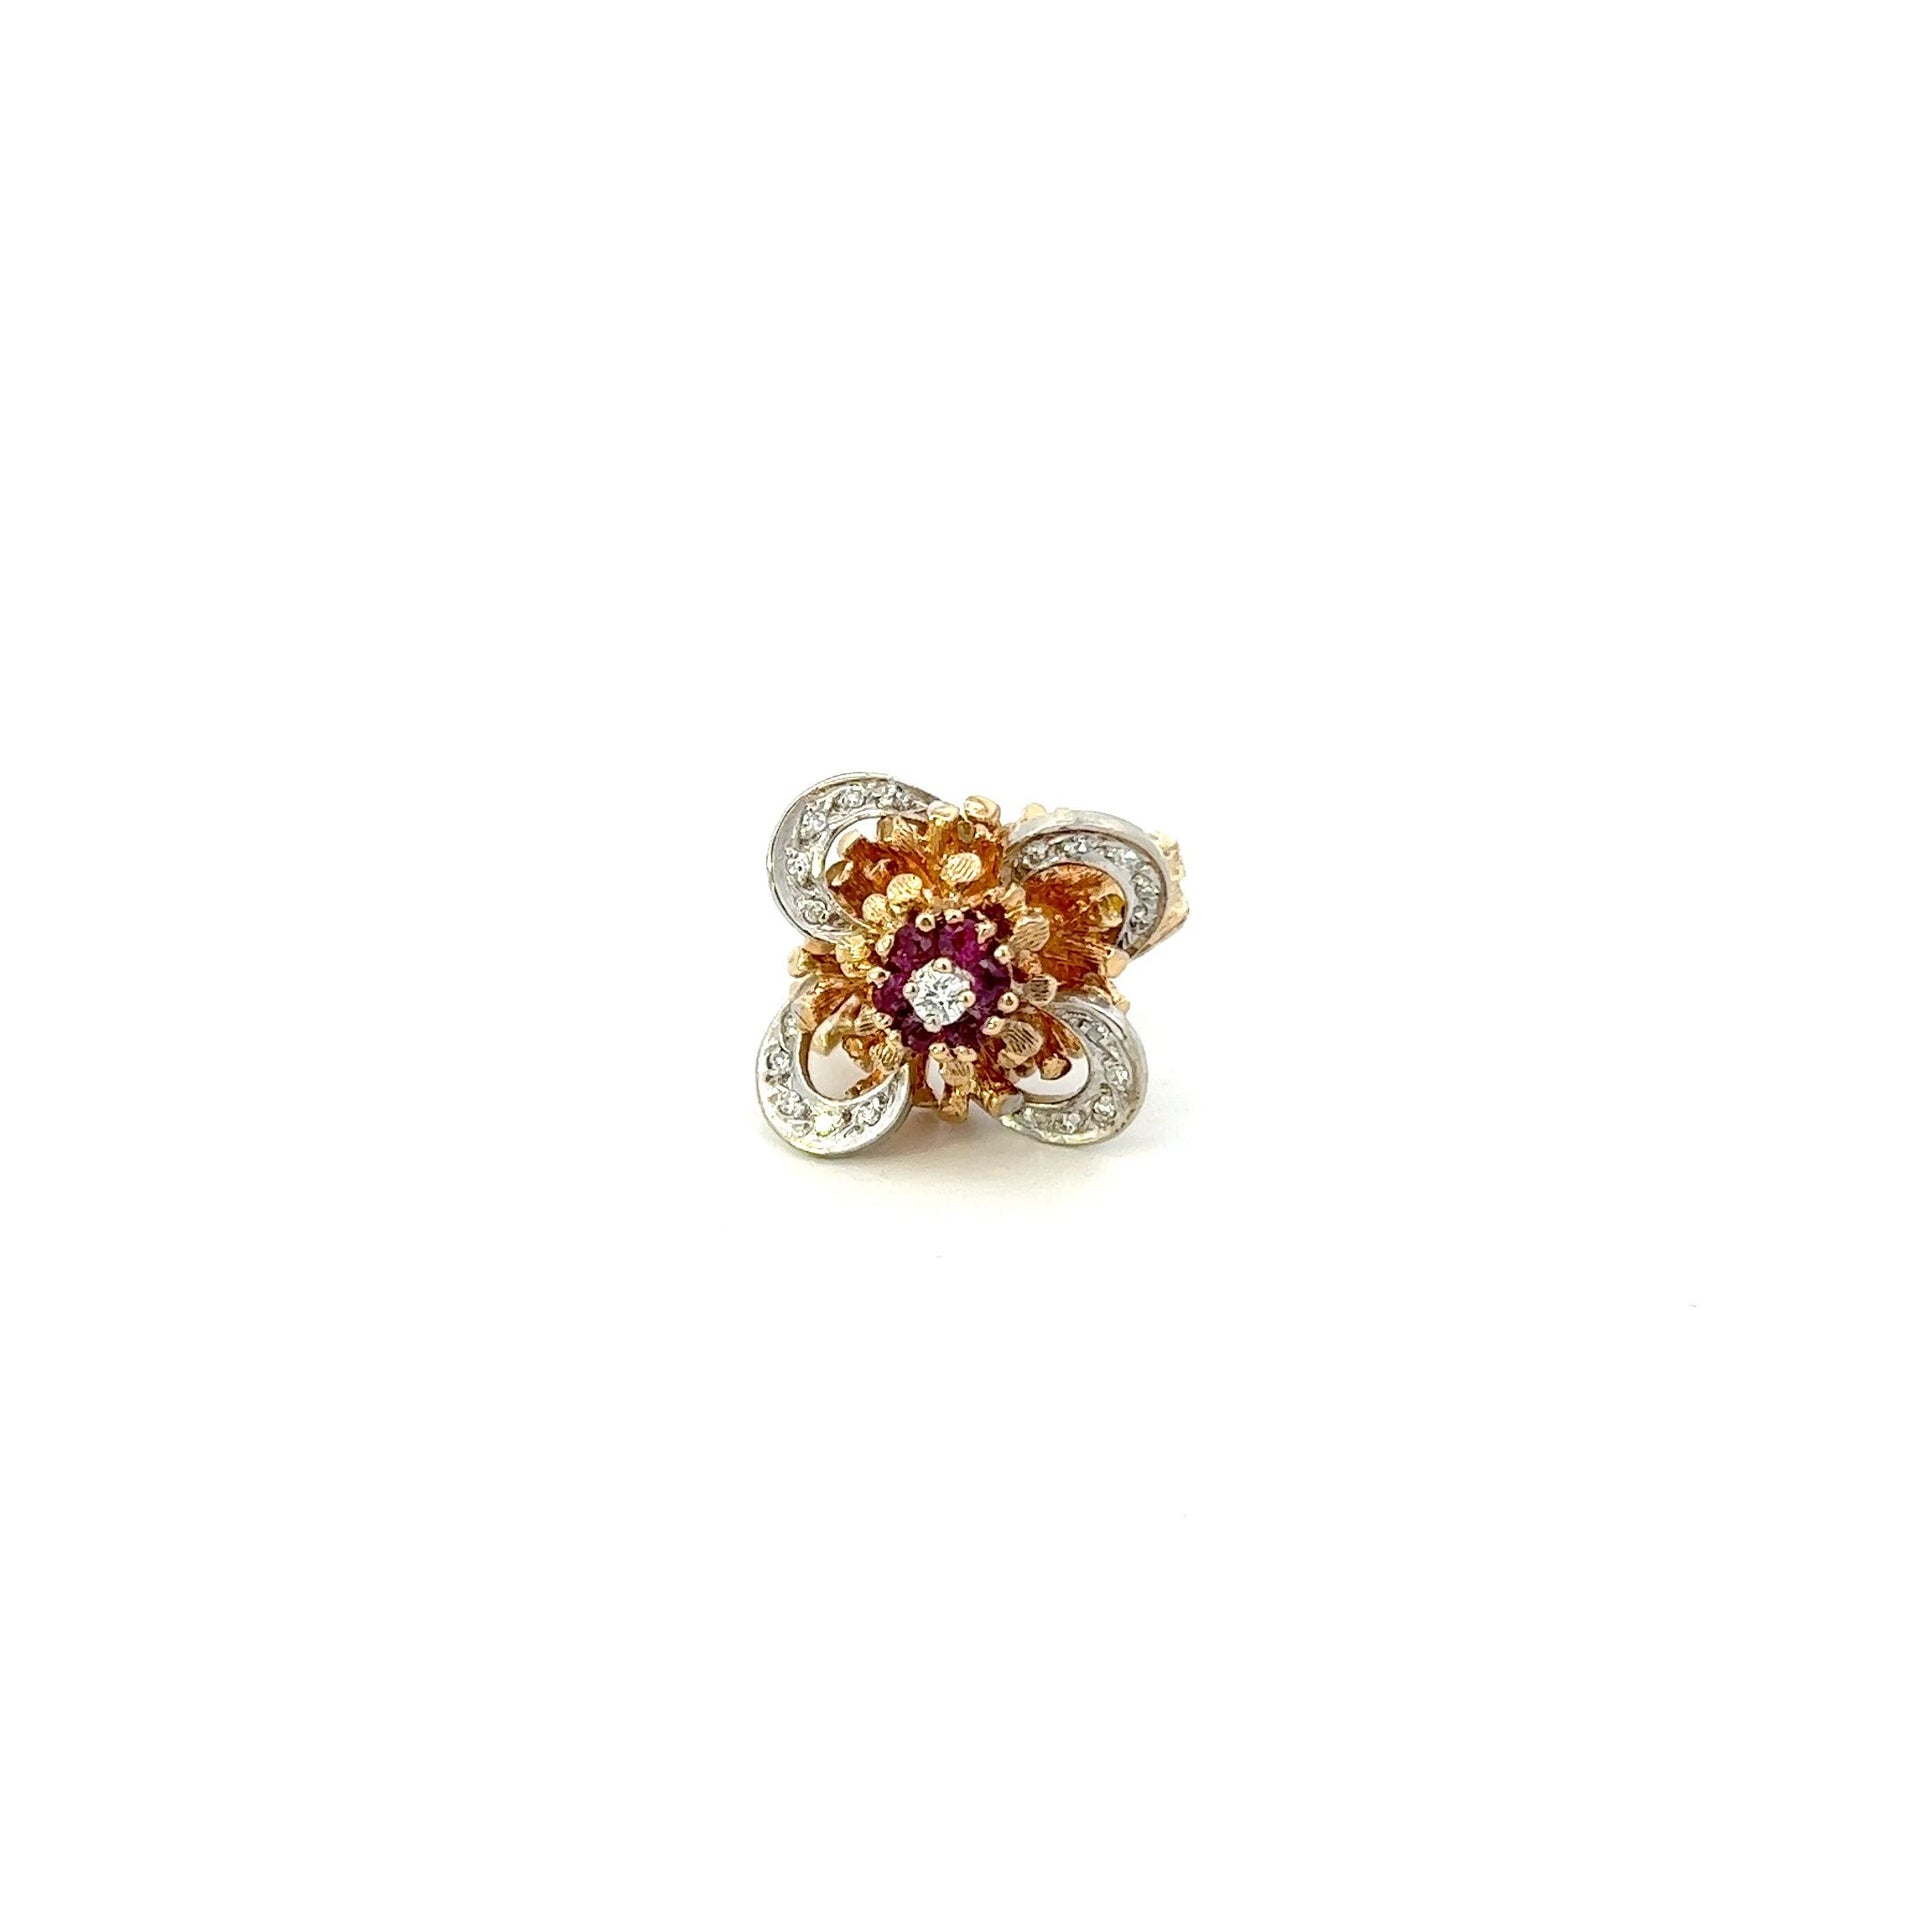 VINTAGE, 14KT ROUND CUT DIAMOND AND RUBY FANCY FLOWER RING.